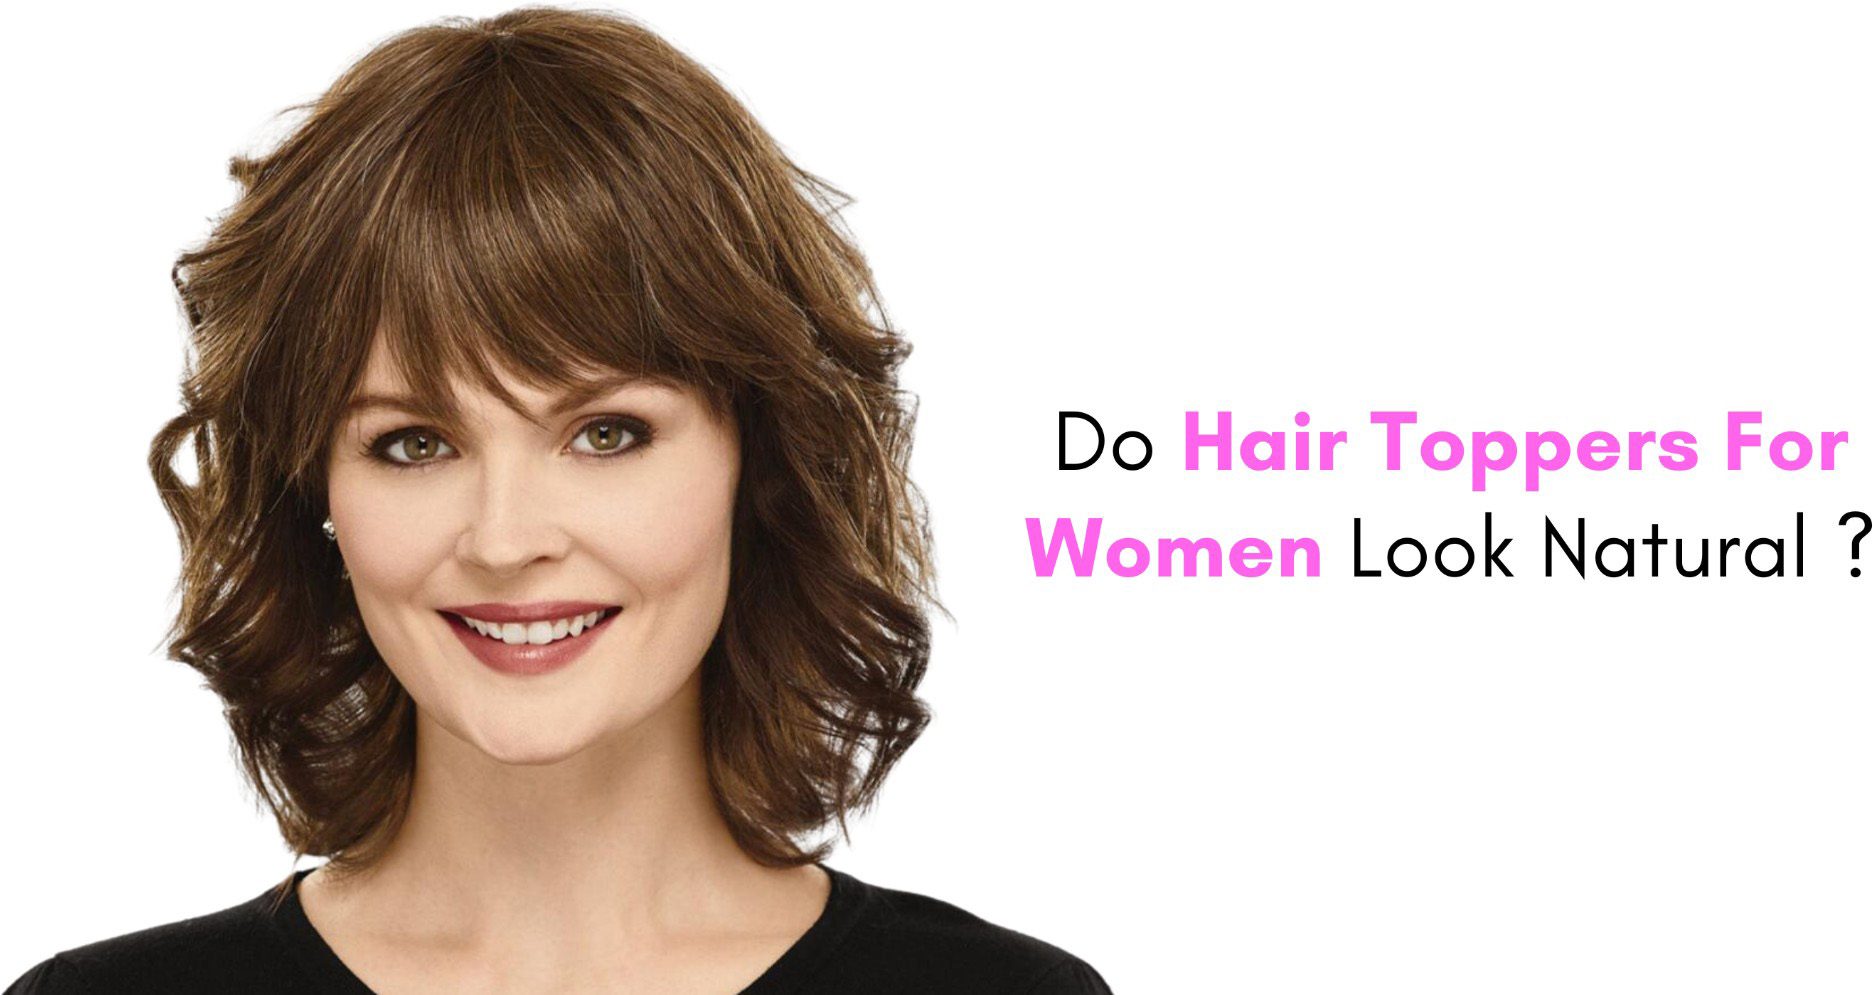 Do Hair Toppers For Women Look Natural